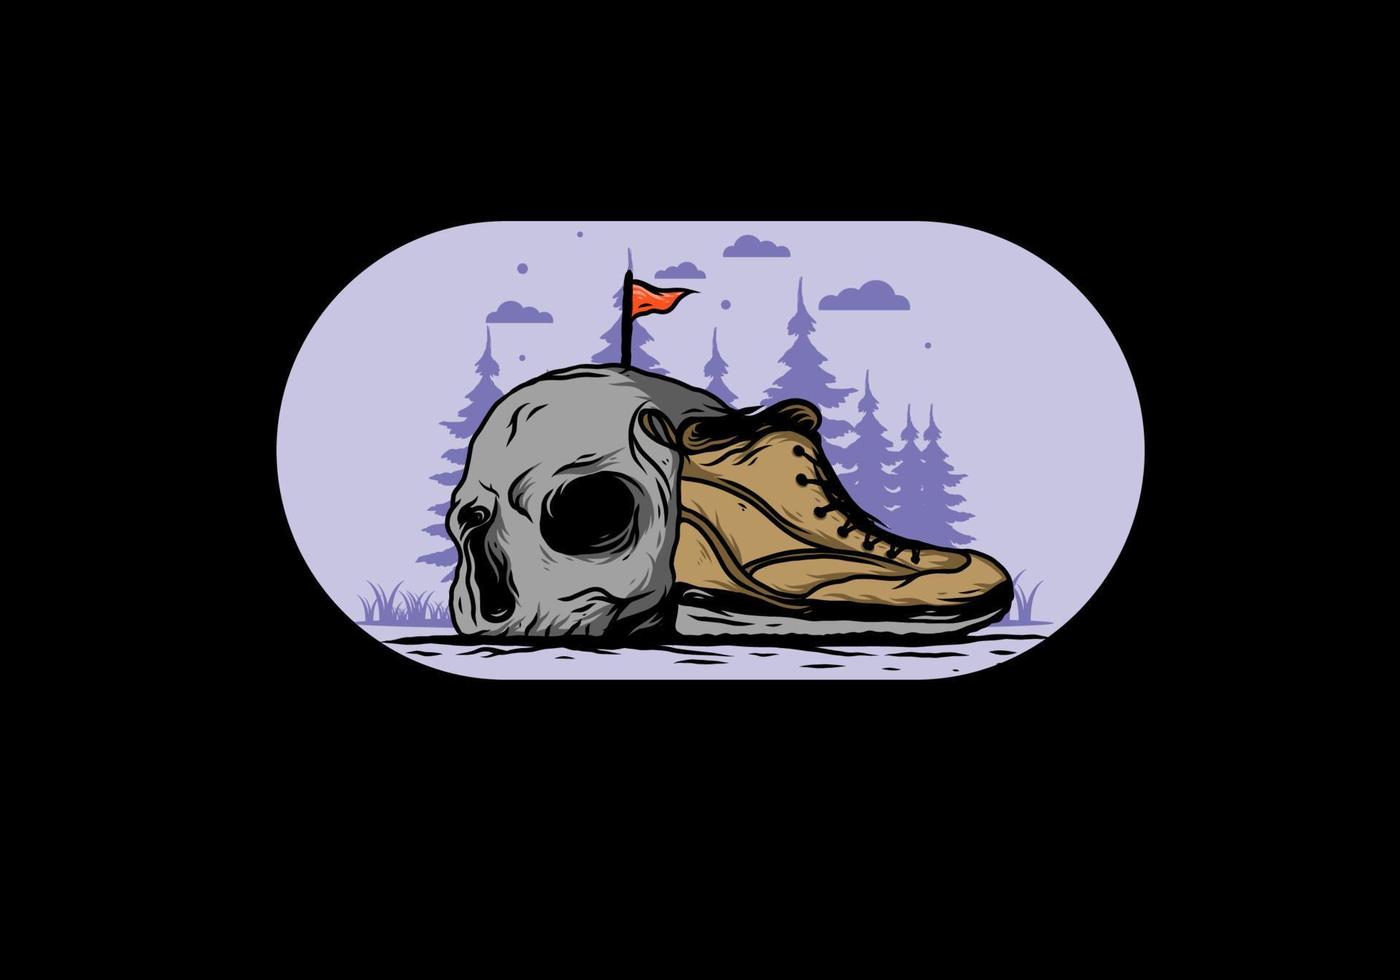 Outdoor boots and skull illustration vector